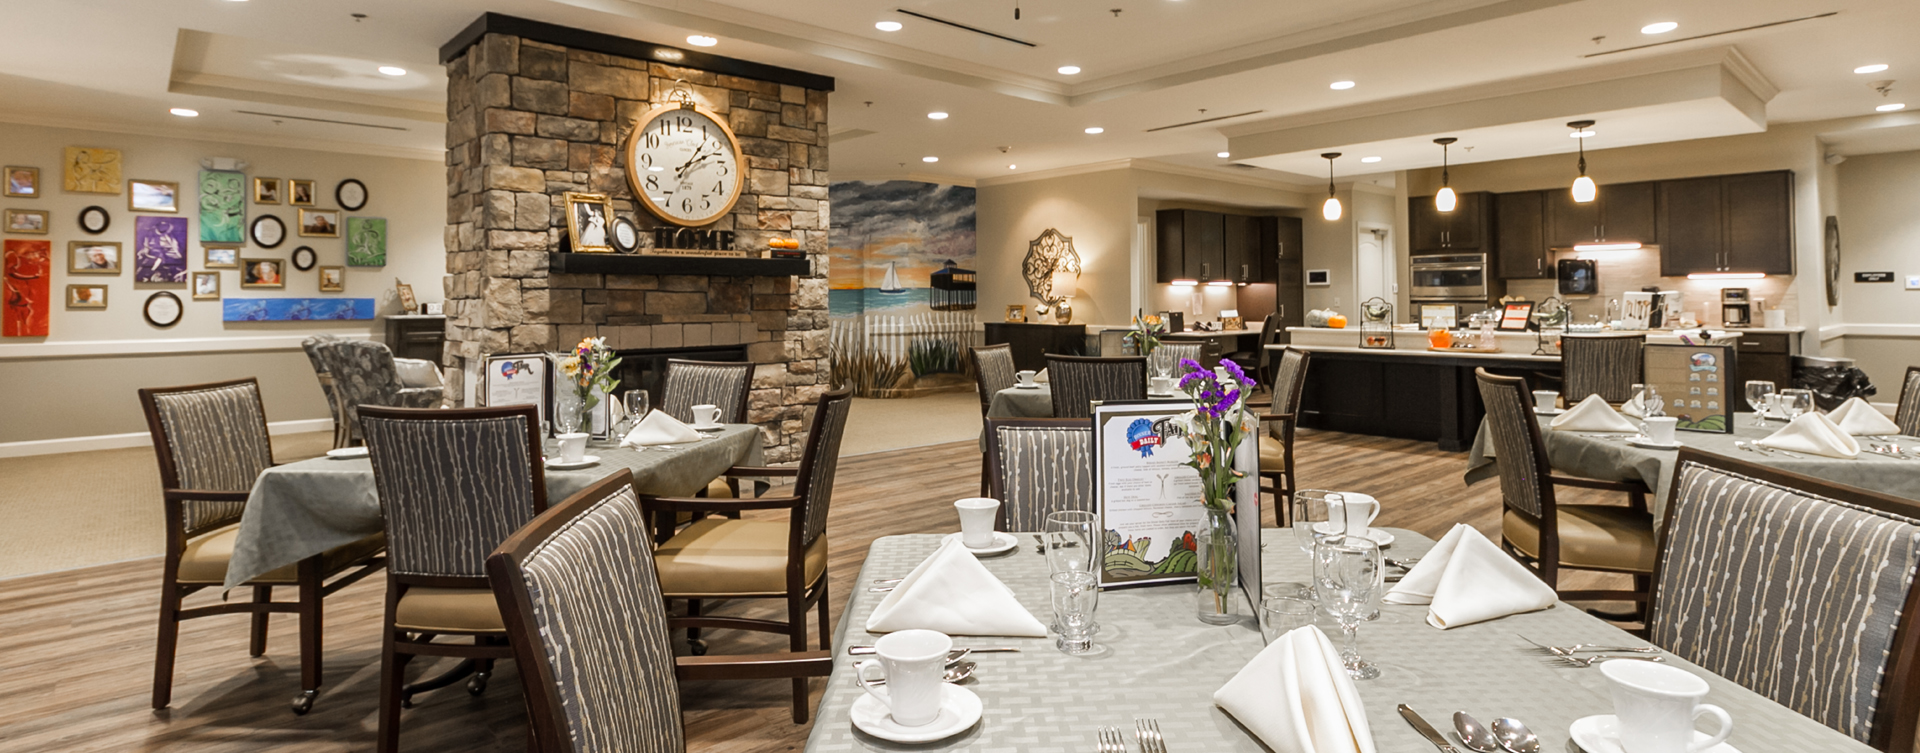 Mary B’s country kitchen helps establish routines, creates activities and triggers a sense of meal time at Bickford of Virginia Beach